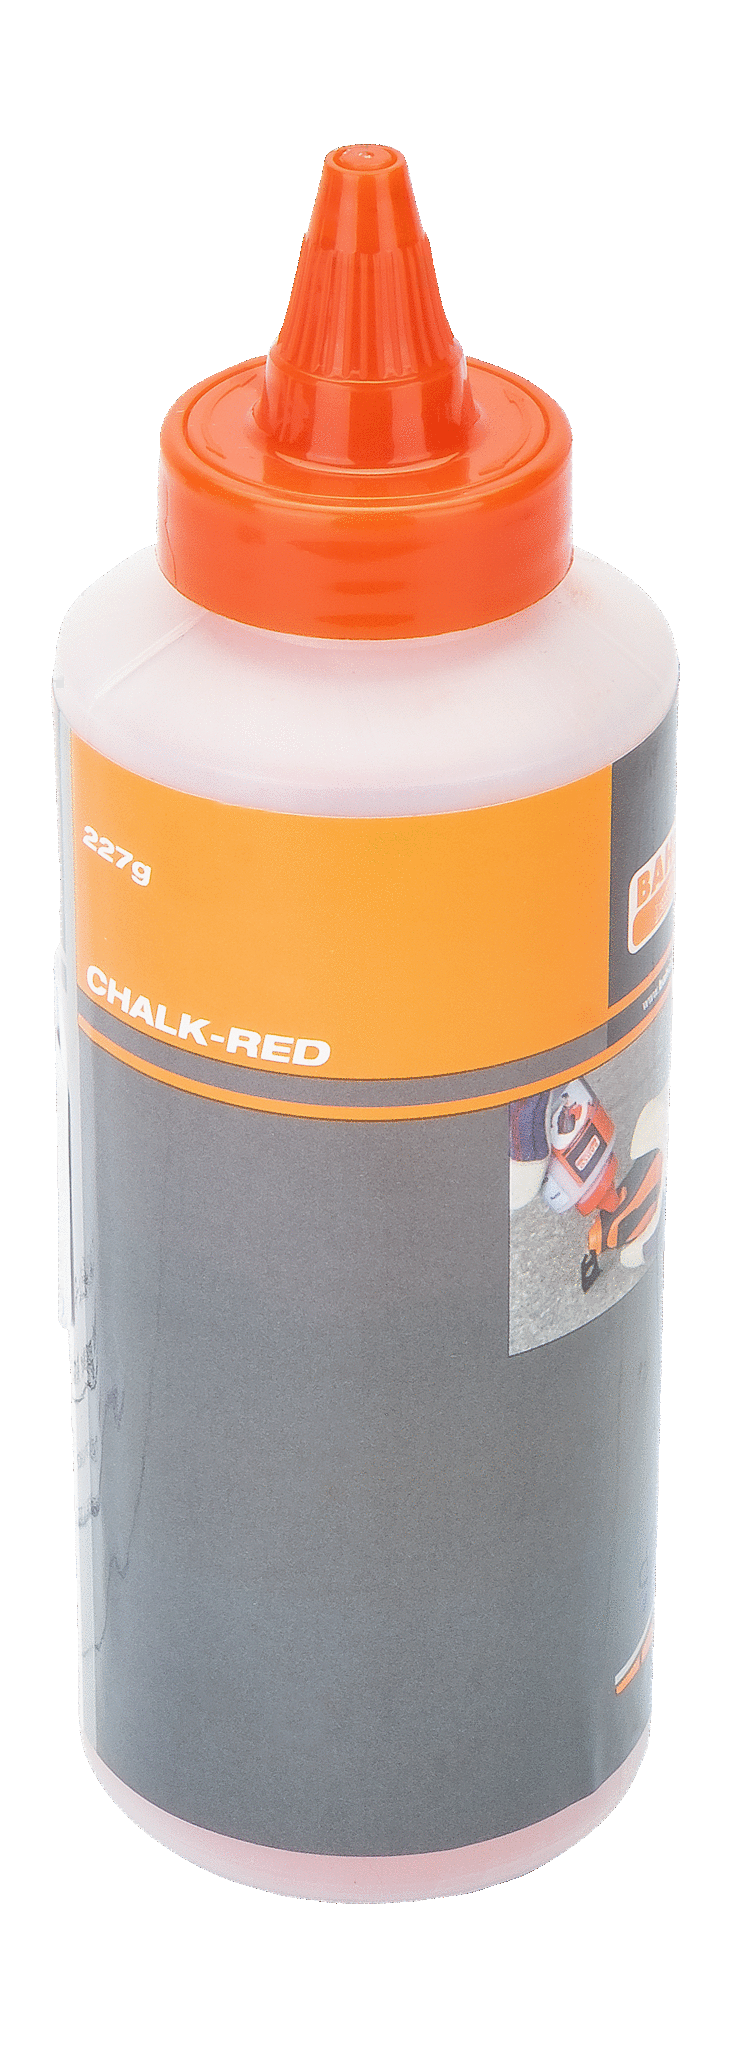 Мел BAHCO CHALK-RED